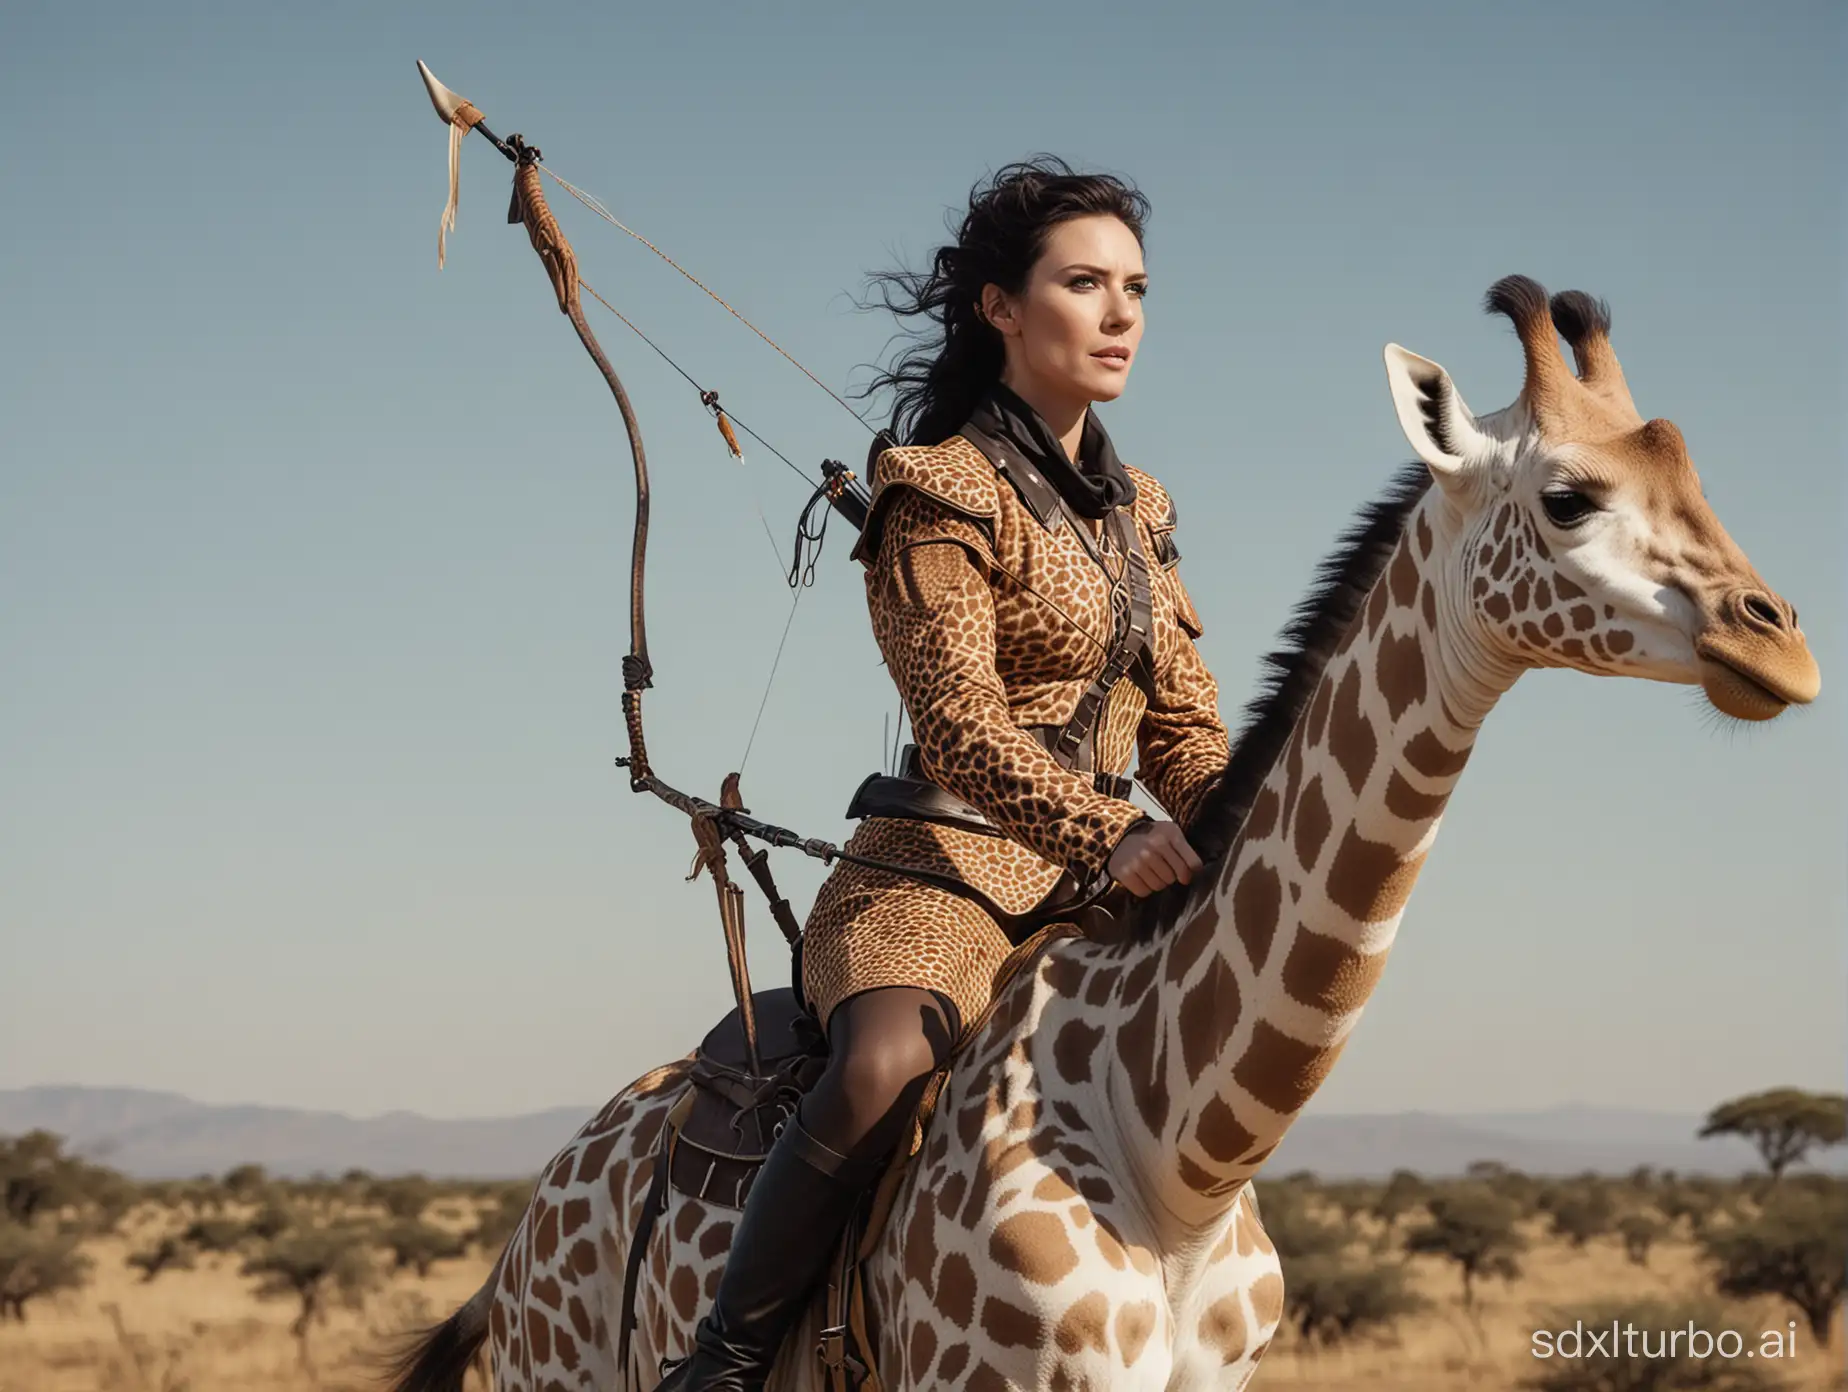 Adventurous-Woman-Riding-Giraffe-with-Hunting-Bow-in-Silly-Armor